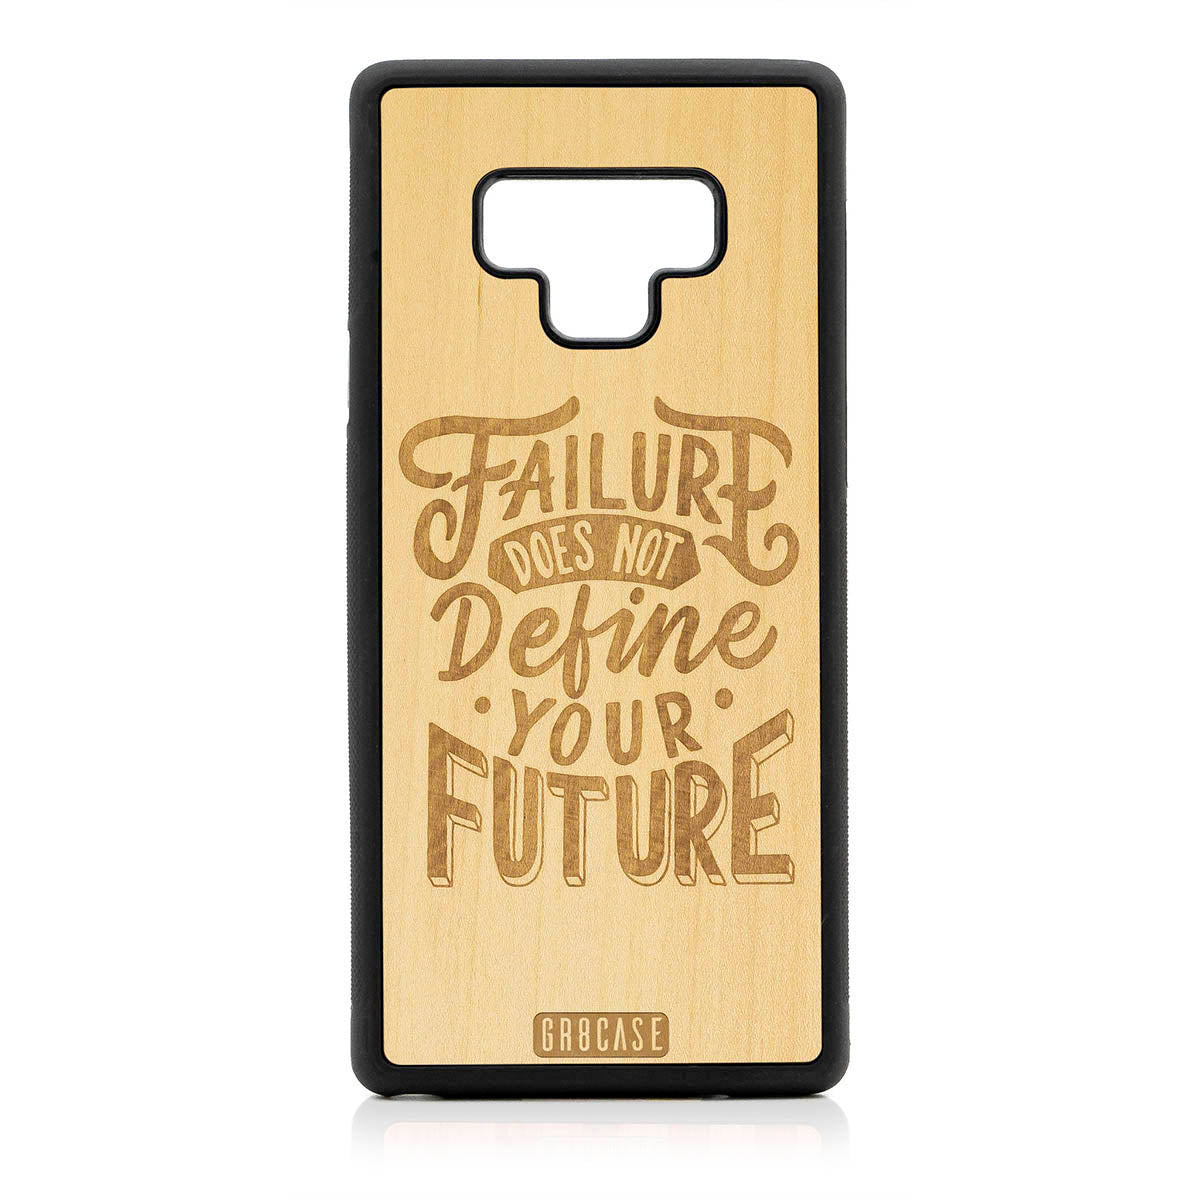 Failure Does Not Define You Future Design Wood Case For Samsung Galaxy Note 9 by GR8CASE